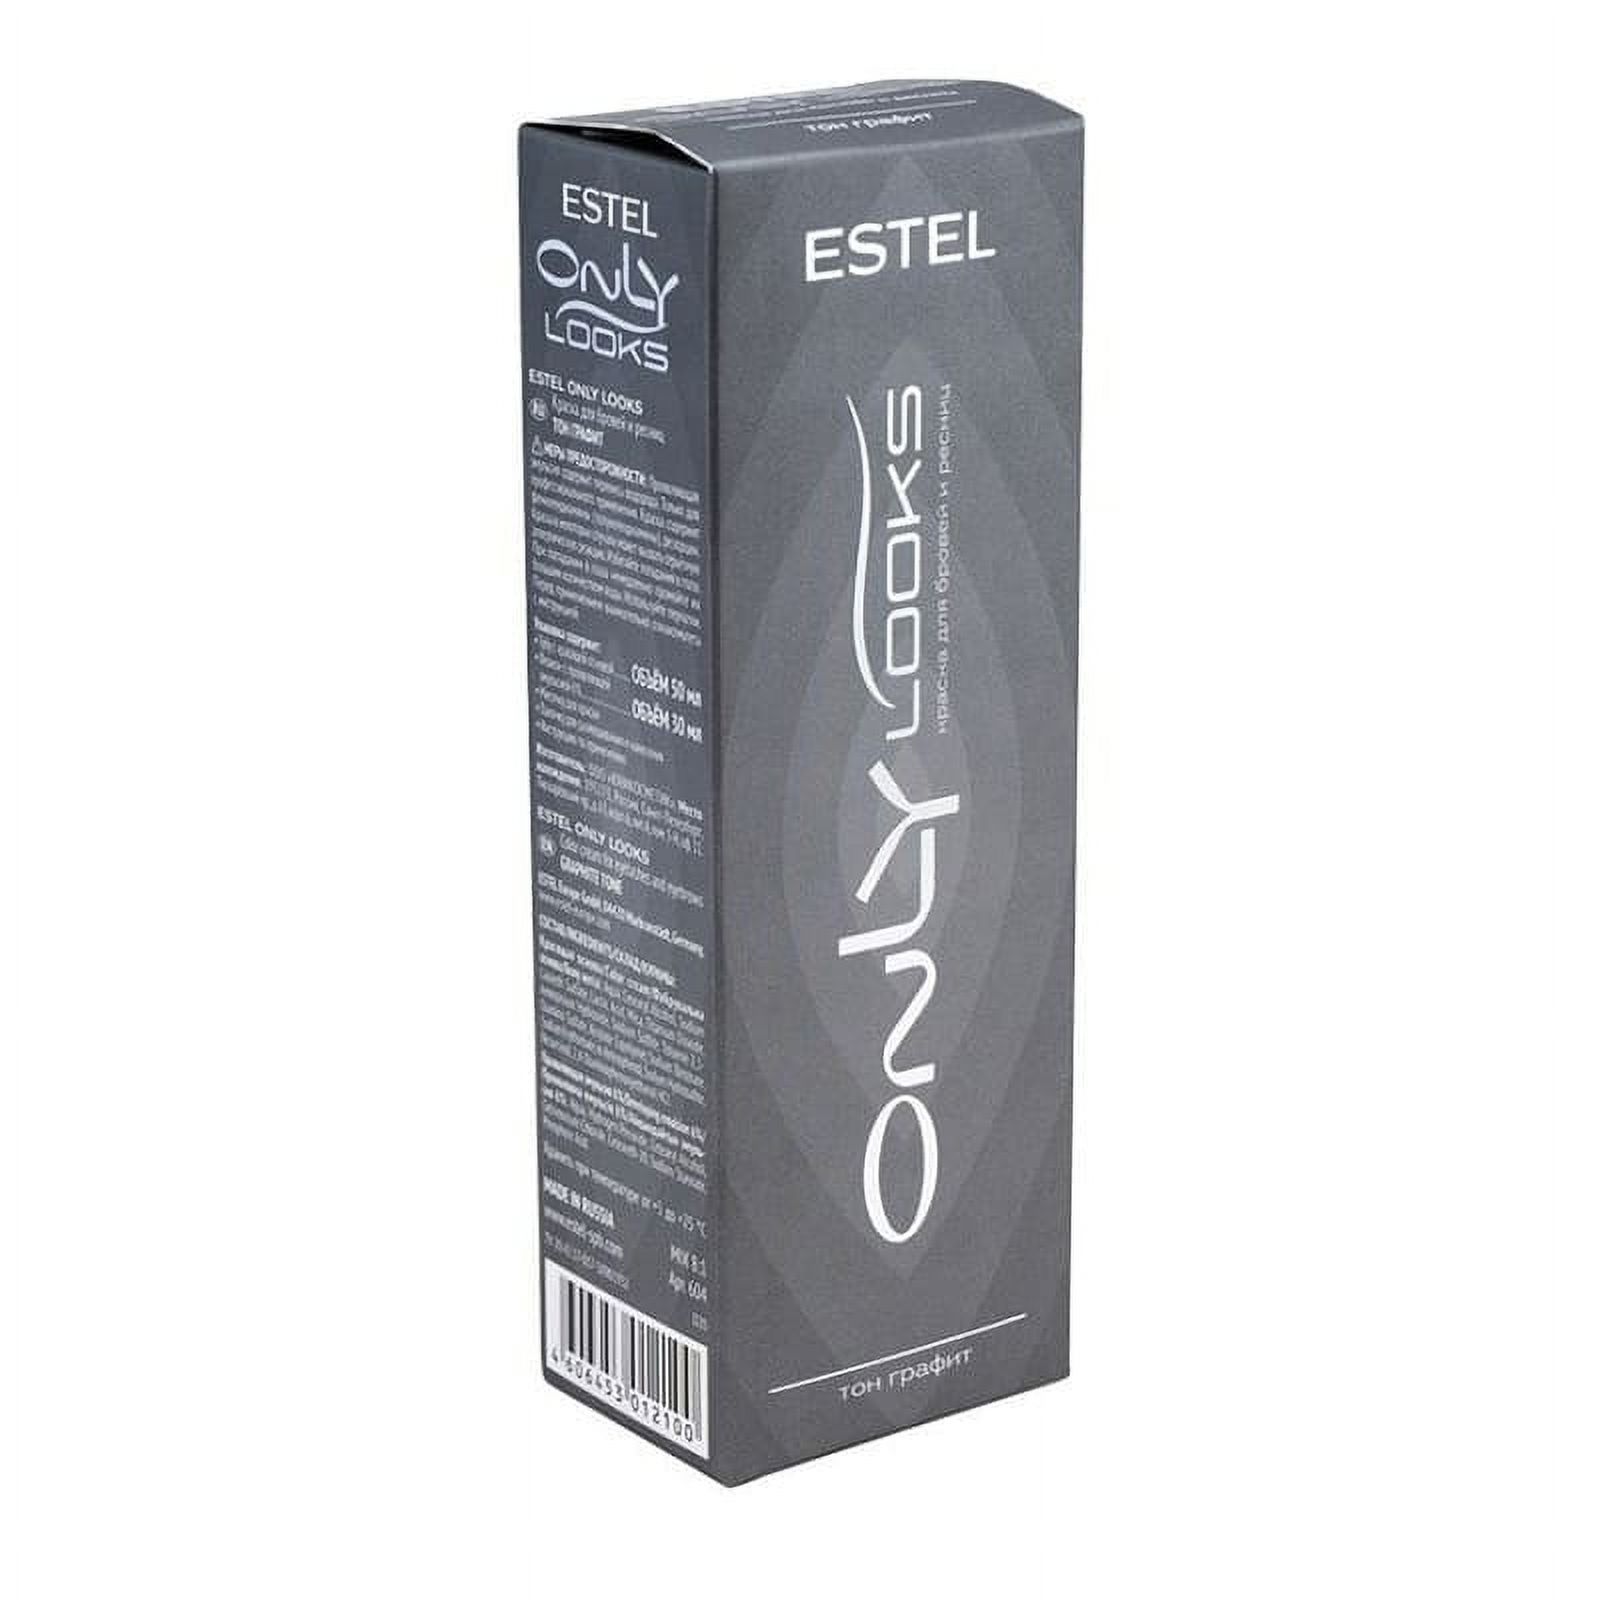 Estel Professional Only Looks Graphite Color Cream for Eyelashes and ...